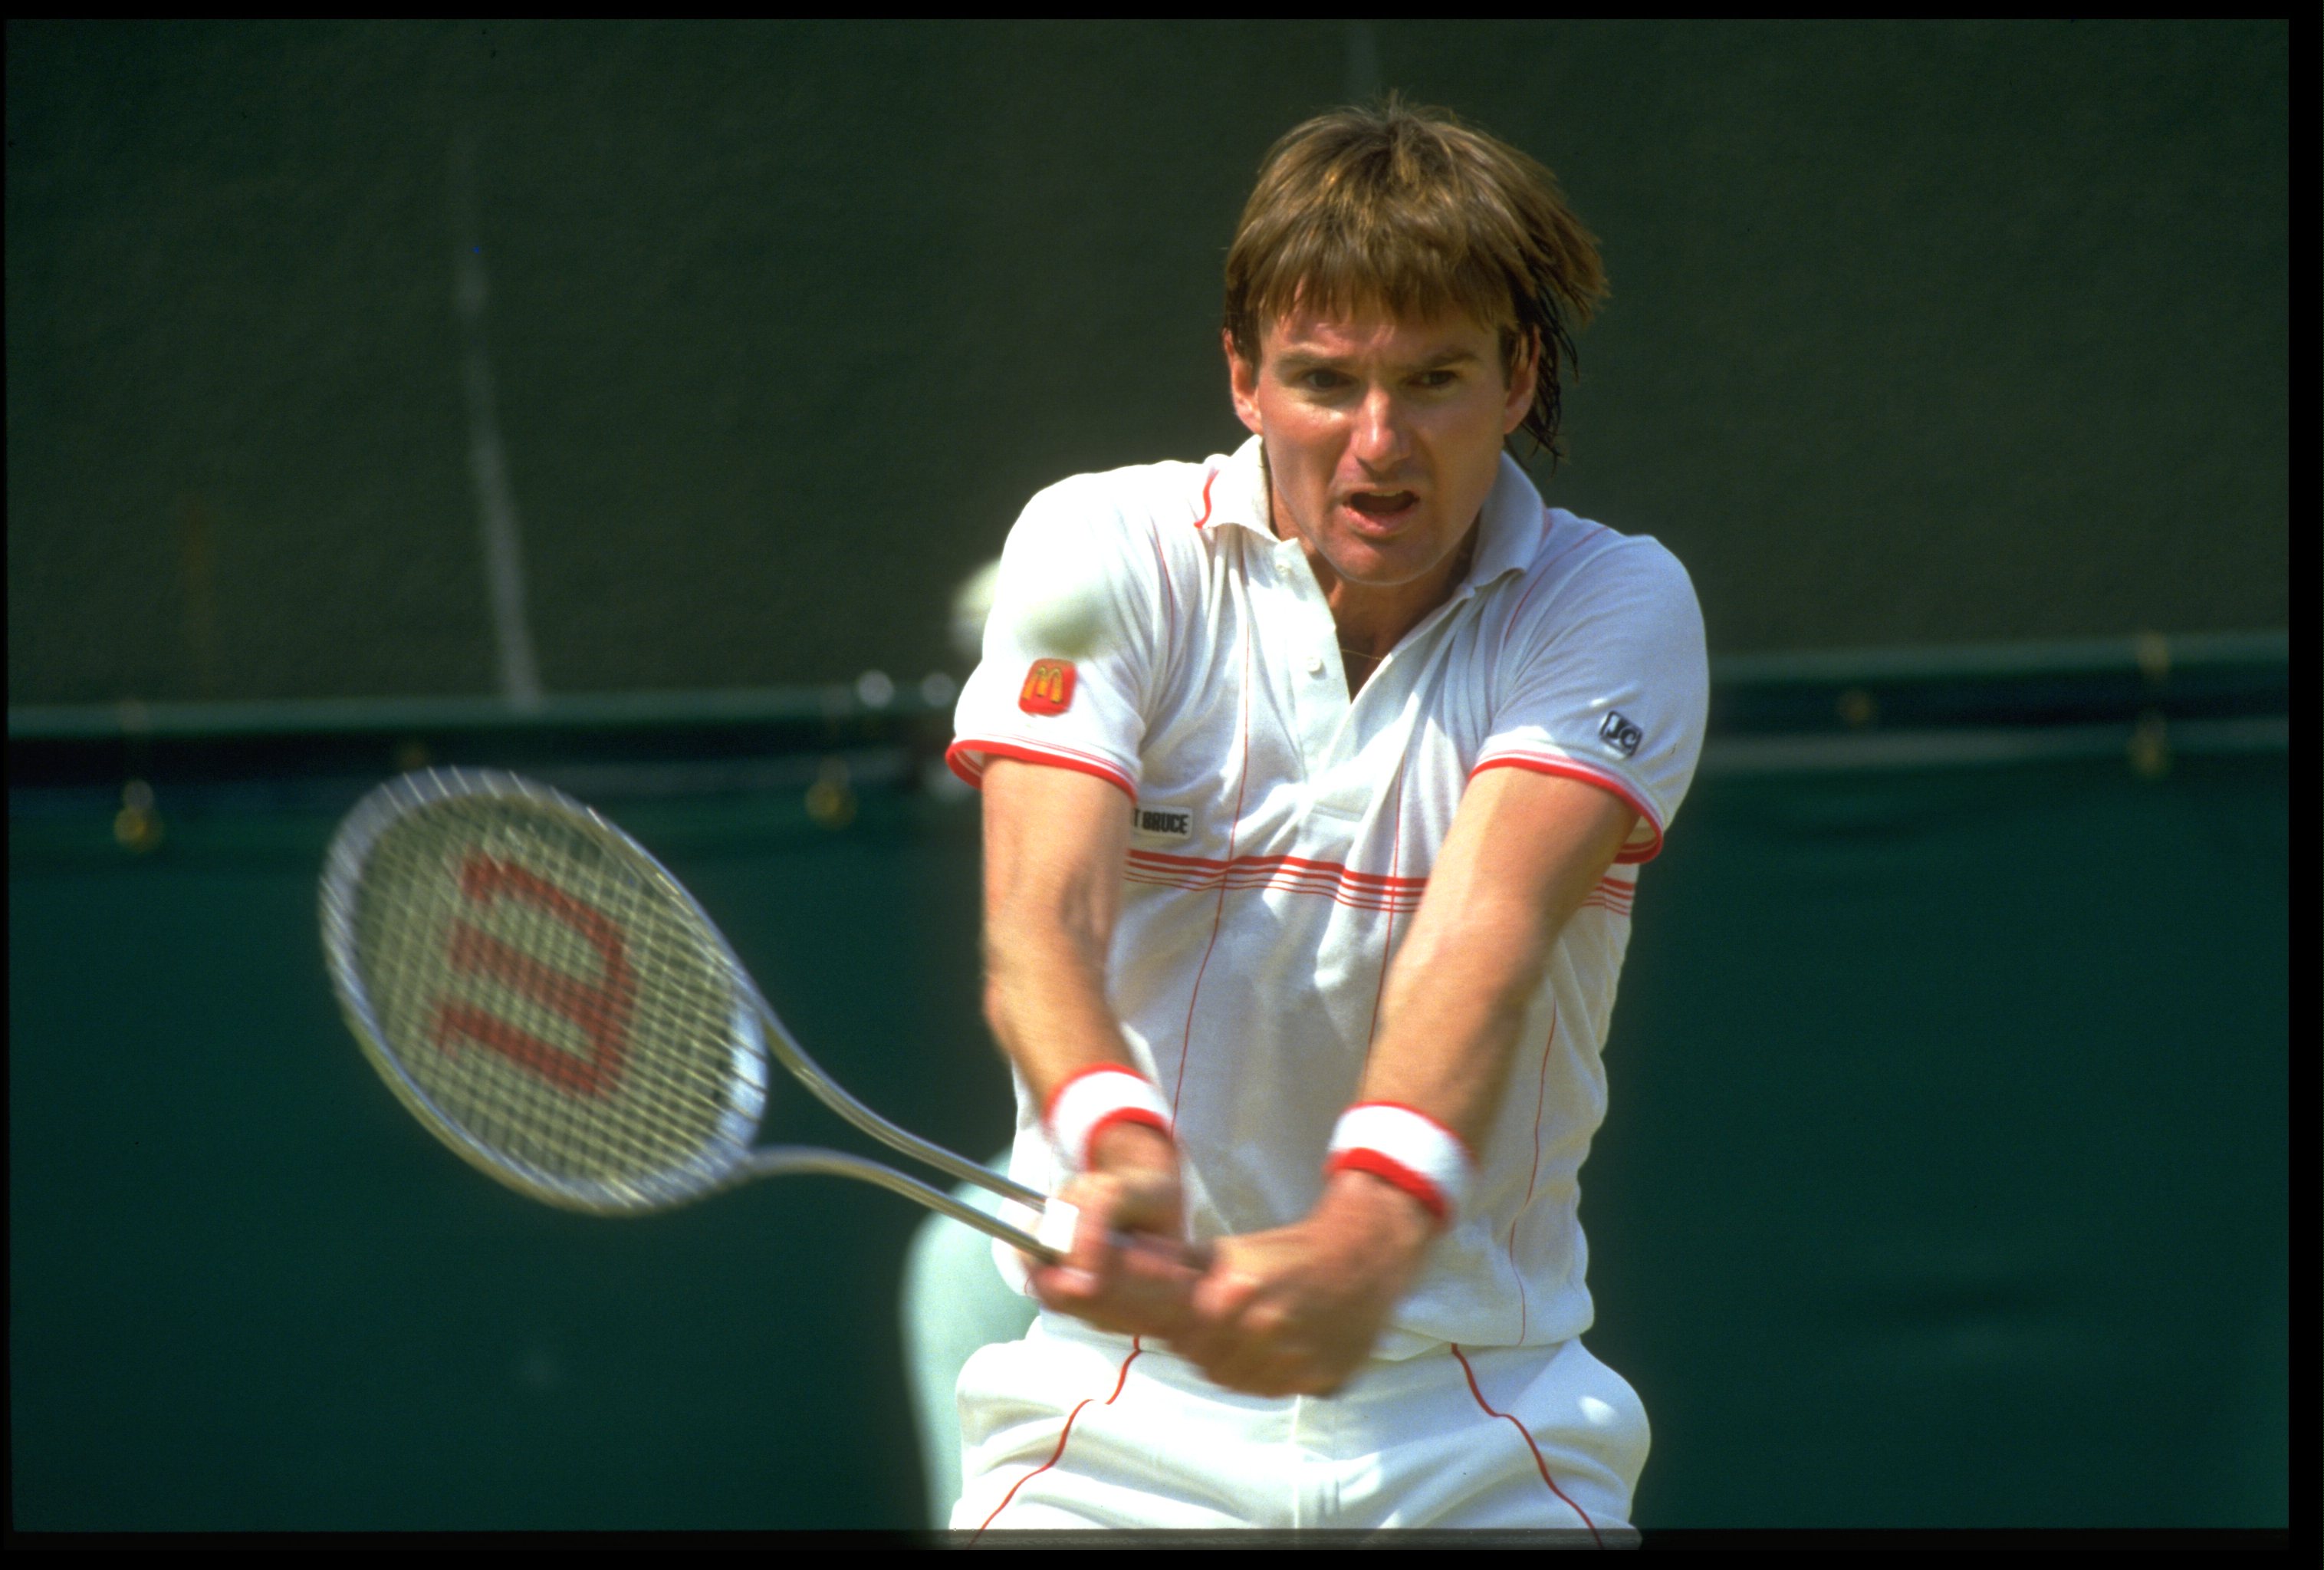 50 Years of Influence, US Open Jimmy Connors